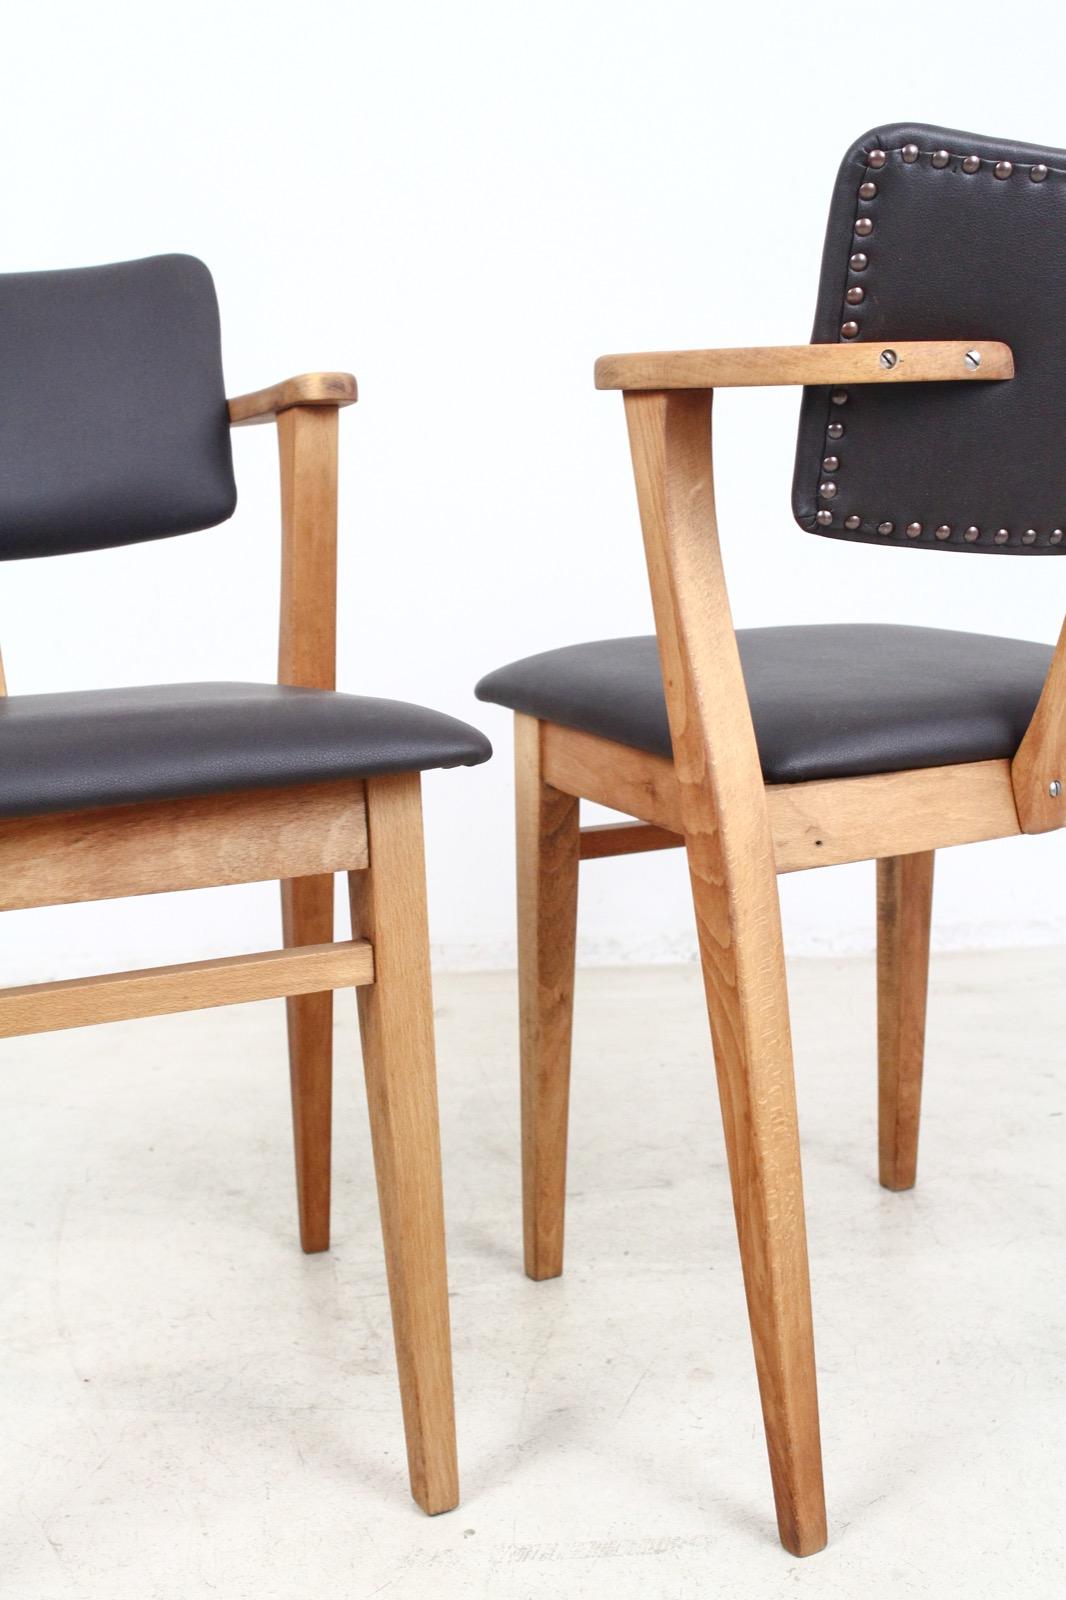 This model Domus armchair was designed by Ilmari Topiovaara and has been completely restored and reupholstered with dark brown faux leather. The scale of the design and the unique design of the arms makes it a great desk chair or occasional chair.